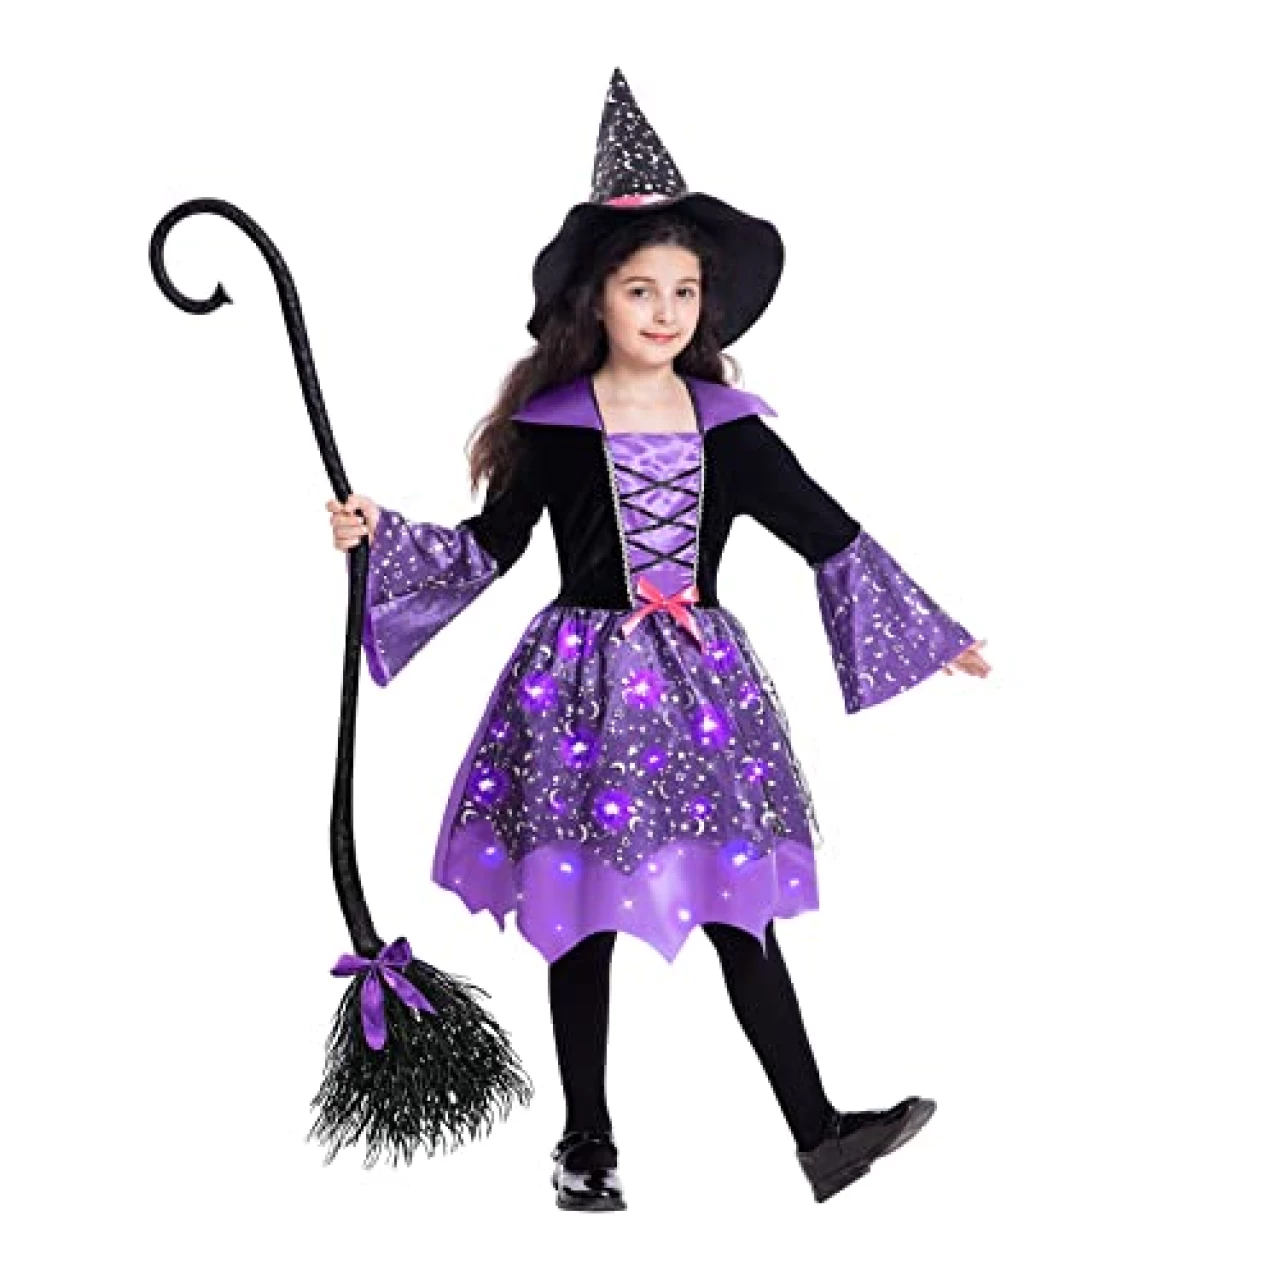 Light Up Witch Costume for Girls, Toddler Witch Halloween Costumes with Witch Broom and Hat, Kids Witch Dress Outfit Glow in the Dark for Halloween Dress-Up Cosplay Party (5-7 S)